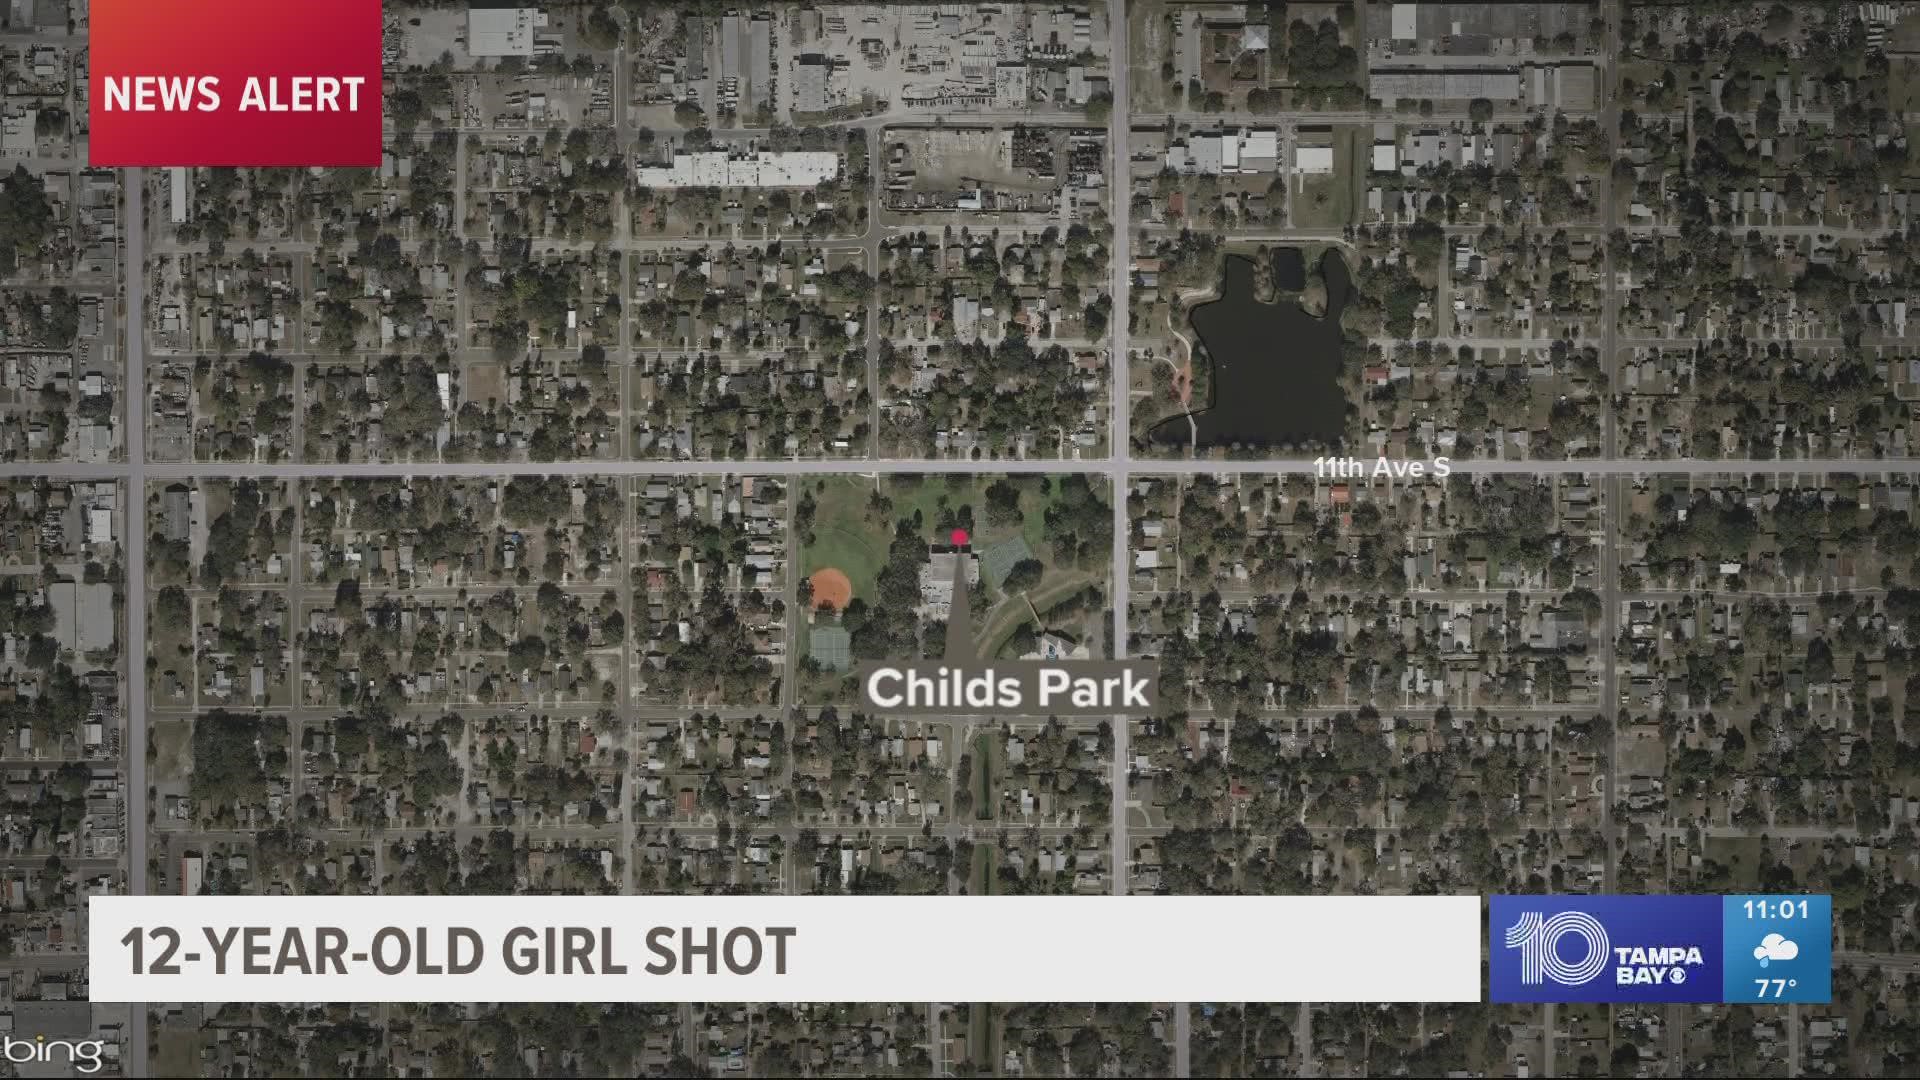 The girl was struck by a bullet in the leg and is being treated for a non-life-threatening injury, St. Petersburg Police say